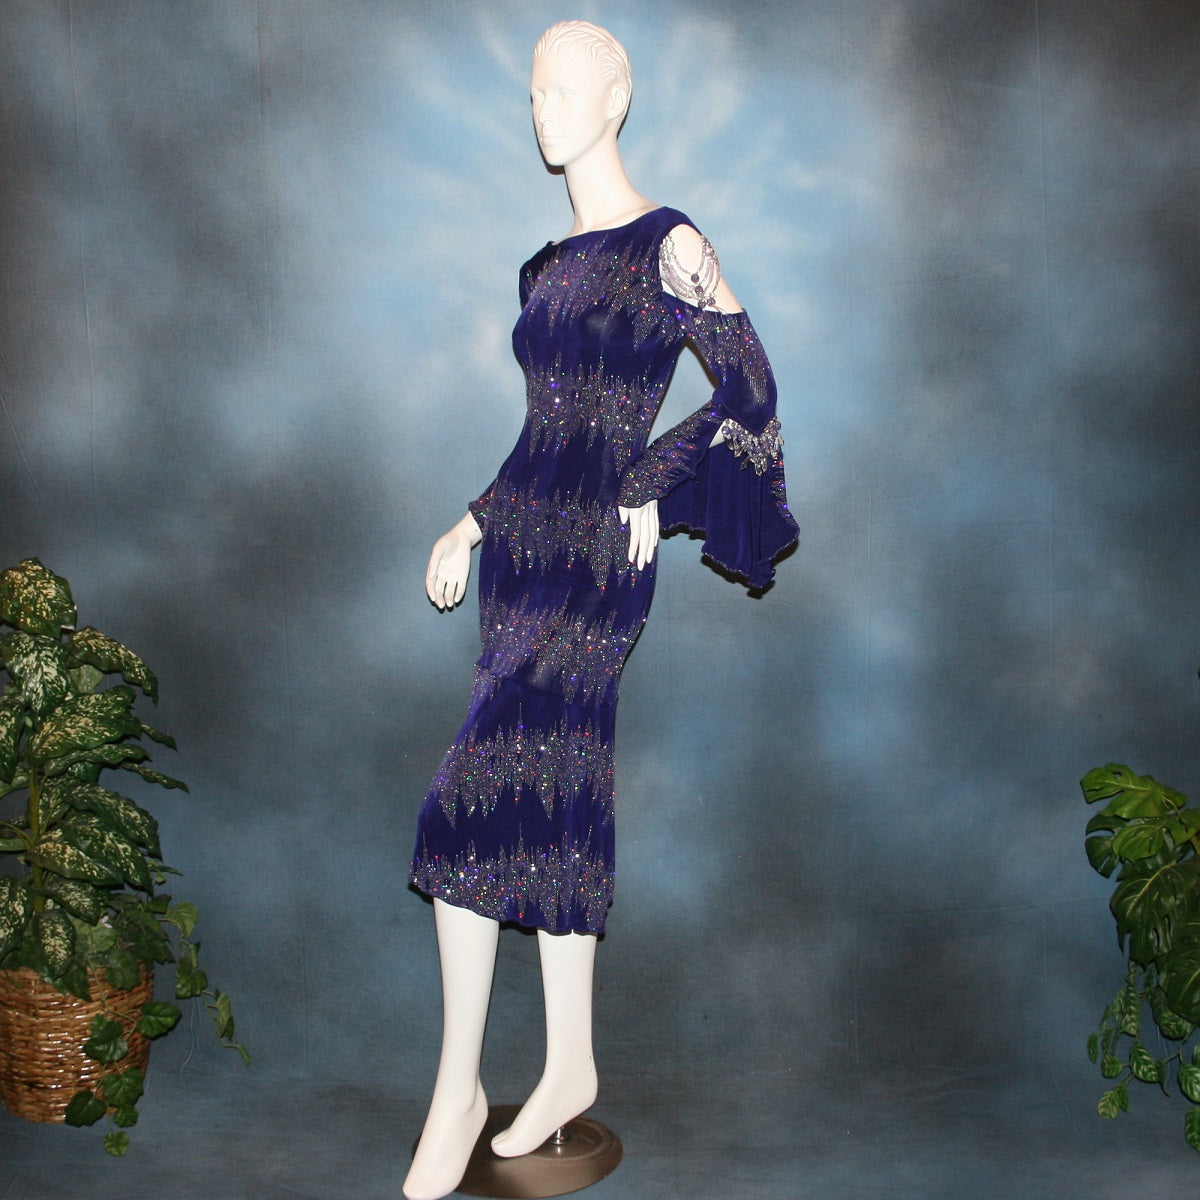 left side view of Deep royal purple Latin/rhythm/tango dress created in deep royal purple glitter slinky with an awesome electrifying glitter pattern features one longe sleeve, with flair at the bottom, & another very interesting cold shoulder detailed one with hand beading & a flaired flounce.